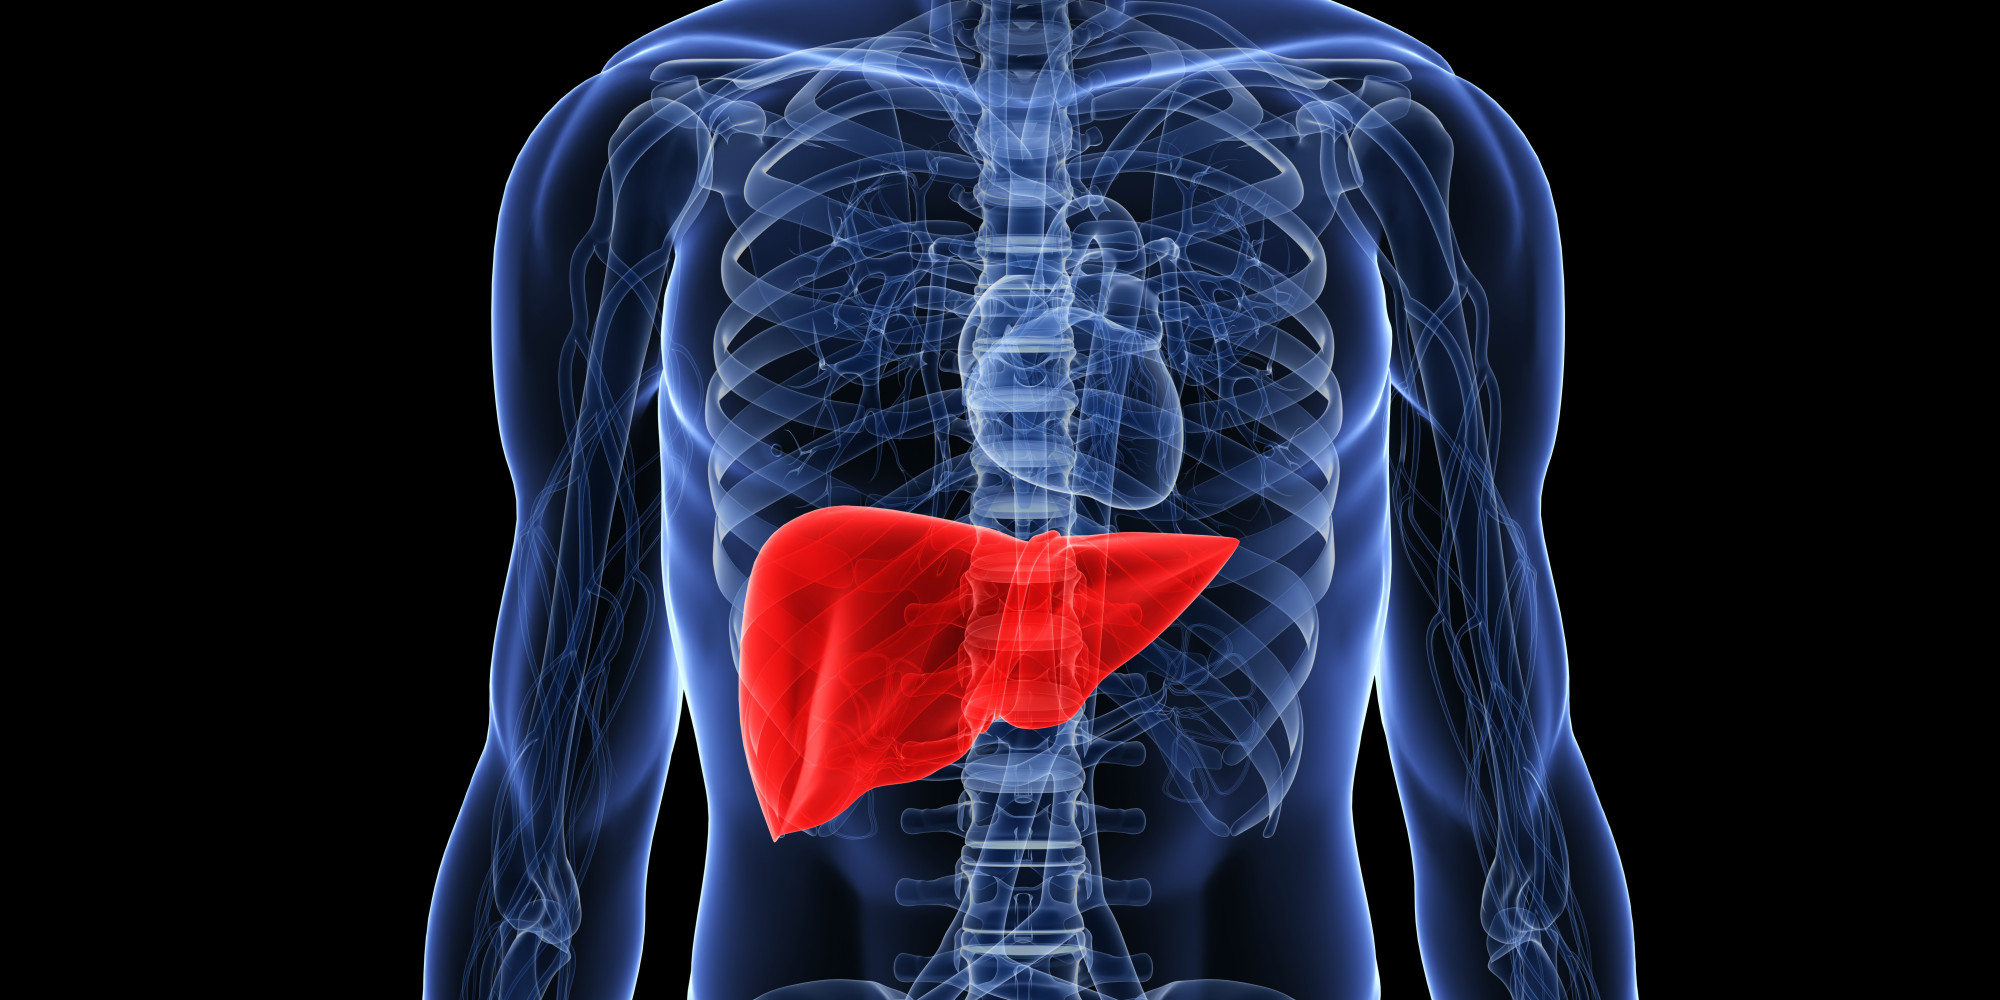 How To Have a Healthy Liver